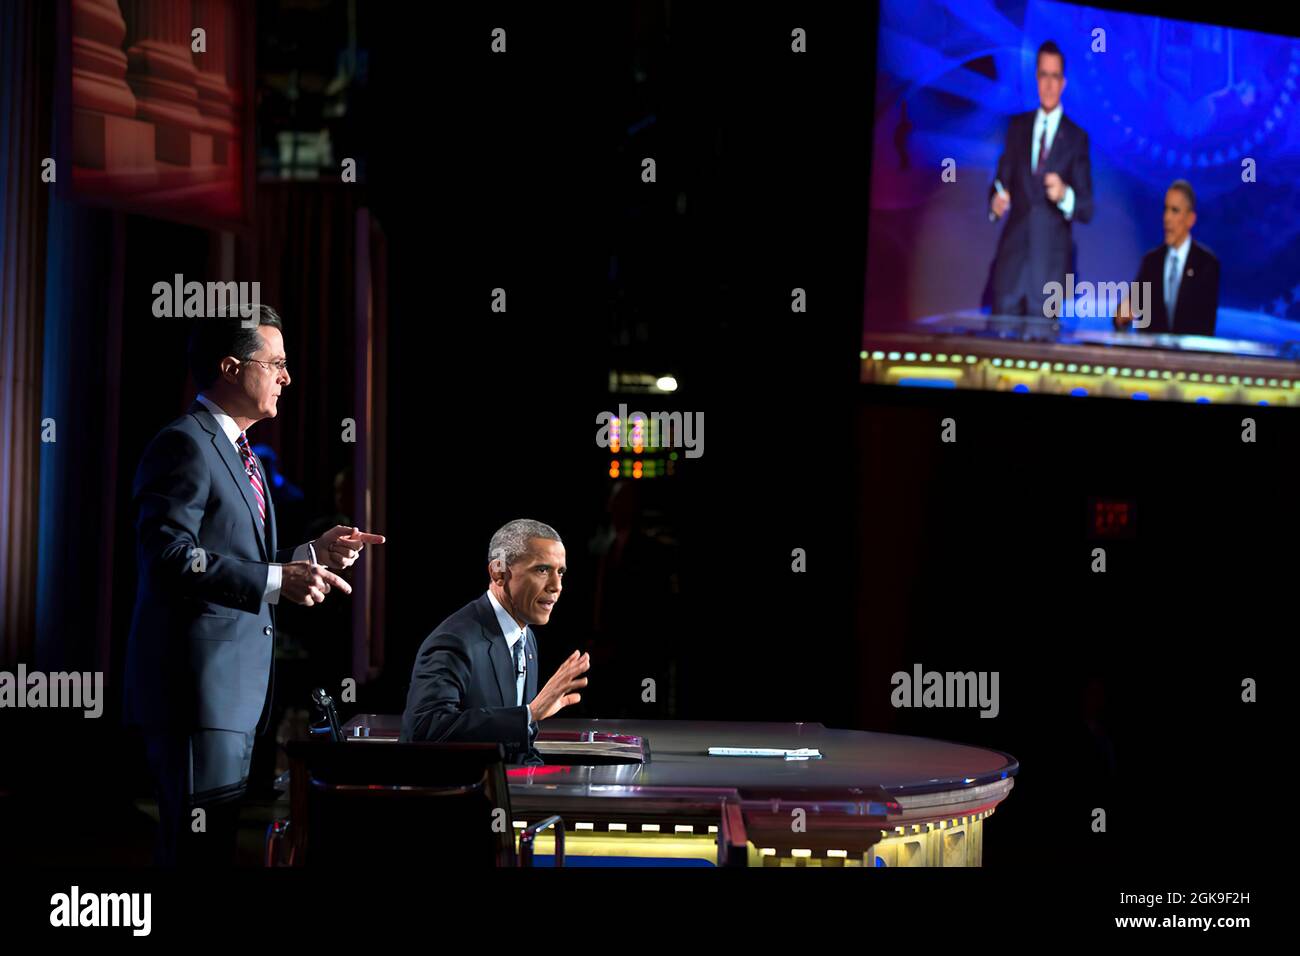 President Barack Obama takes over for Stephen Colbert during 'The Word' segment of 'The Colbert Report with Stephen Colbert' during a taping at George Washington University's Lisner Auditorium in Washington, D.C., Dec. 8, 2014. (Official White House Photo by Pete Souza) This official White House photograph is being made available only for publication by news organizations and/or for personal use printing by the subject(s) of the photograph. The photograph may not be manipulated in any way and may not be used in commercial or political materials, advertisements, emails, products, promotions tha Stock Photo